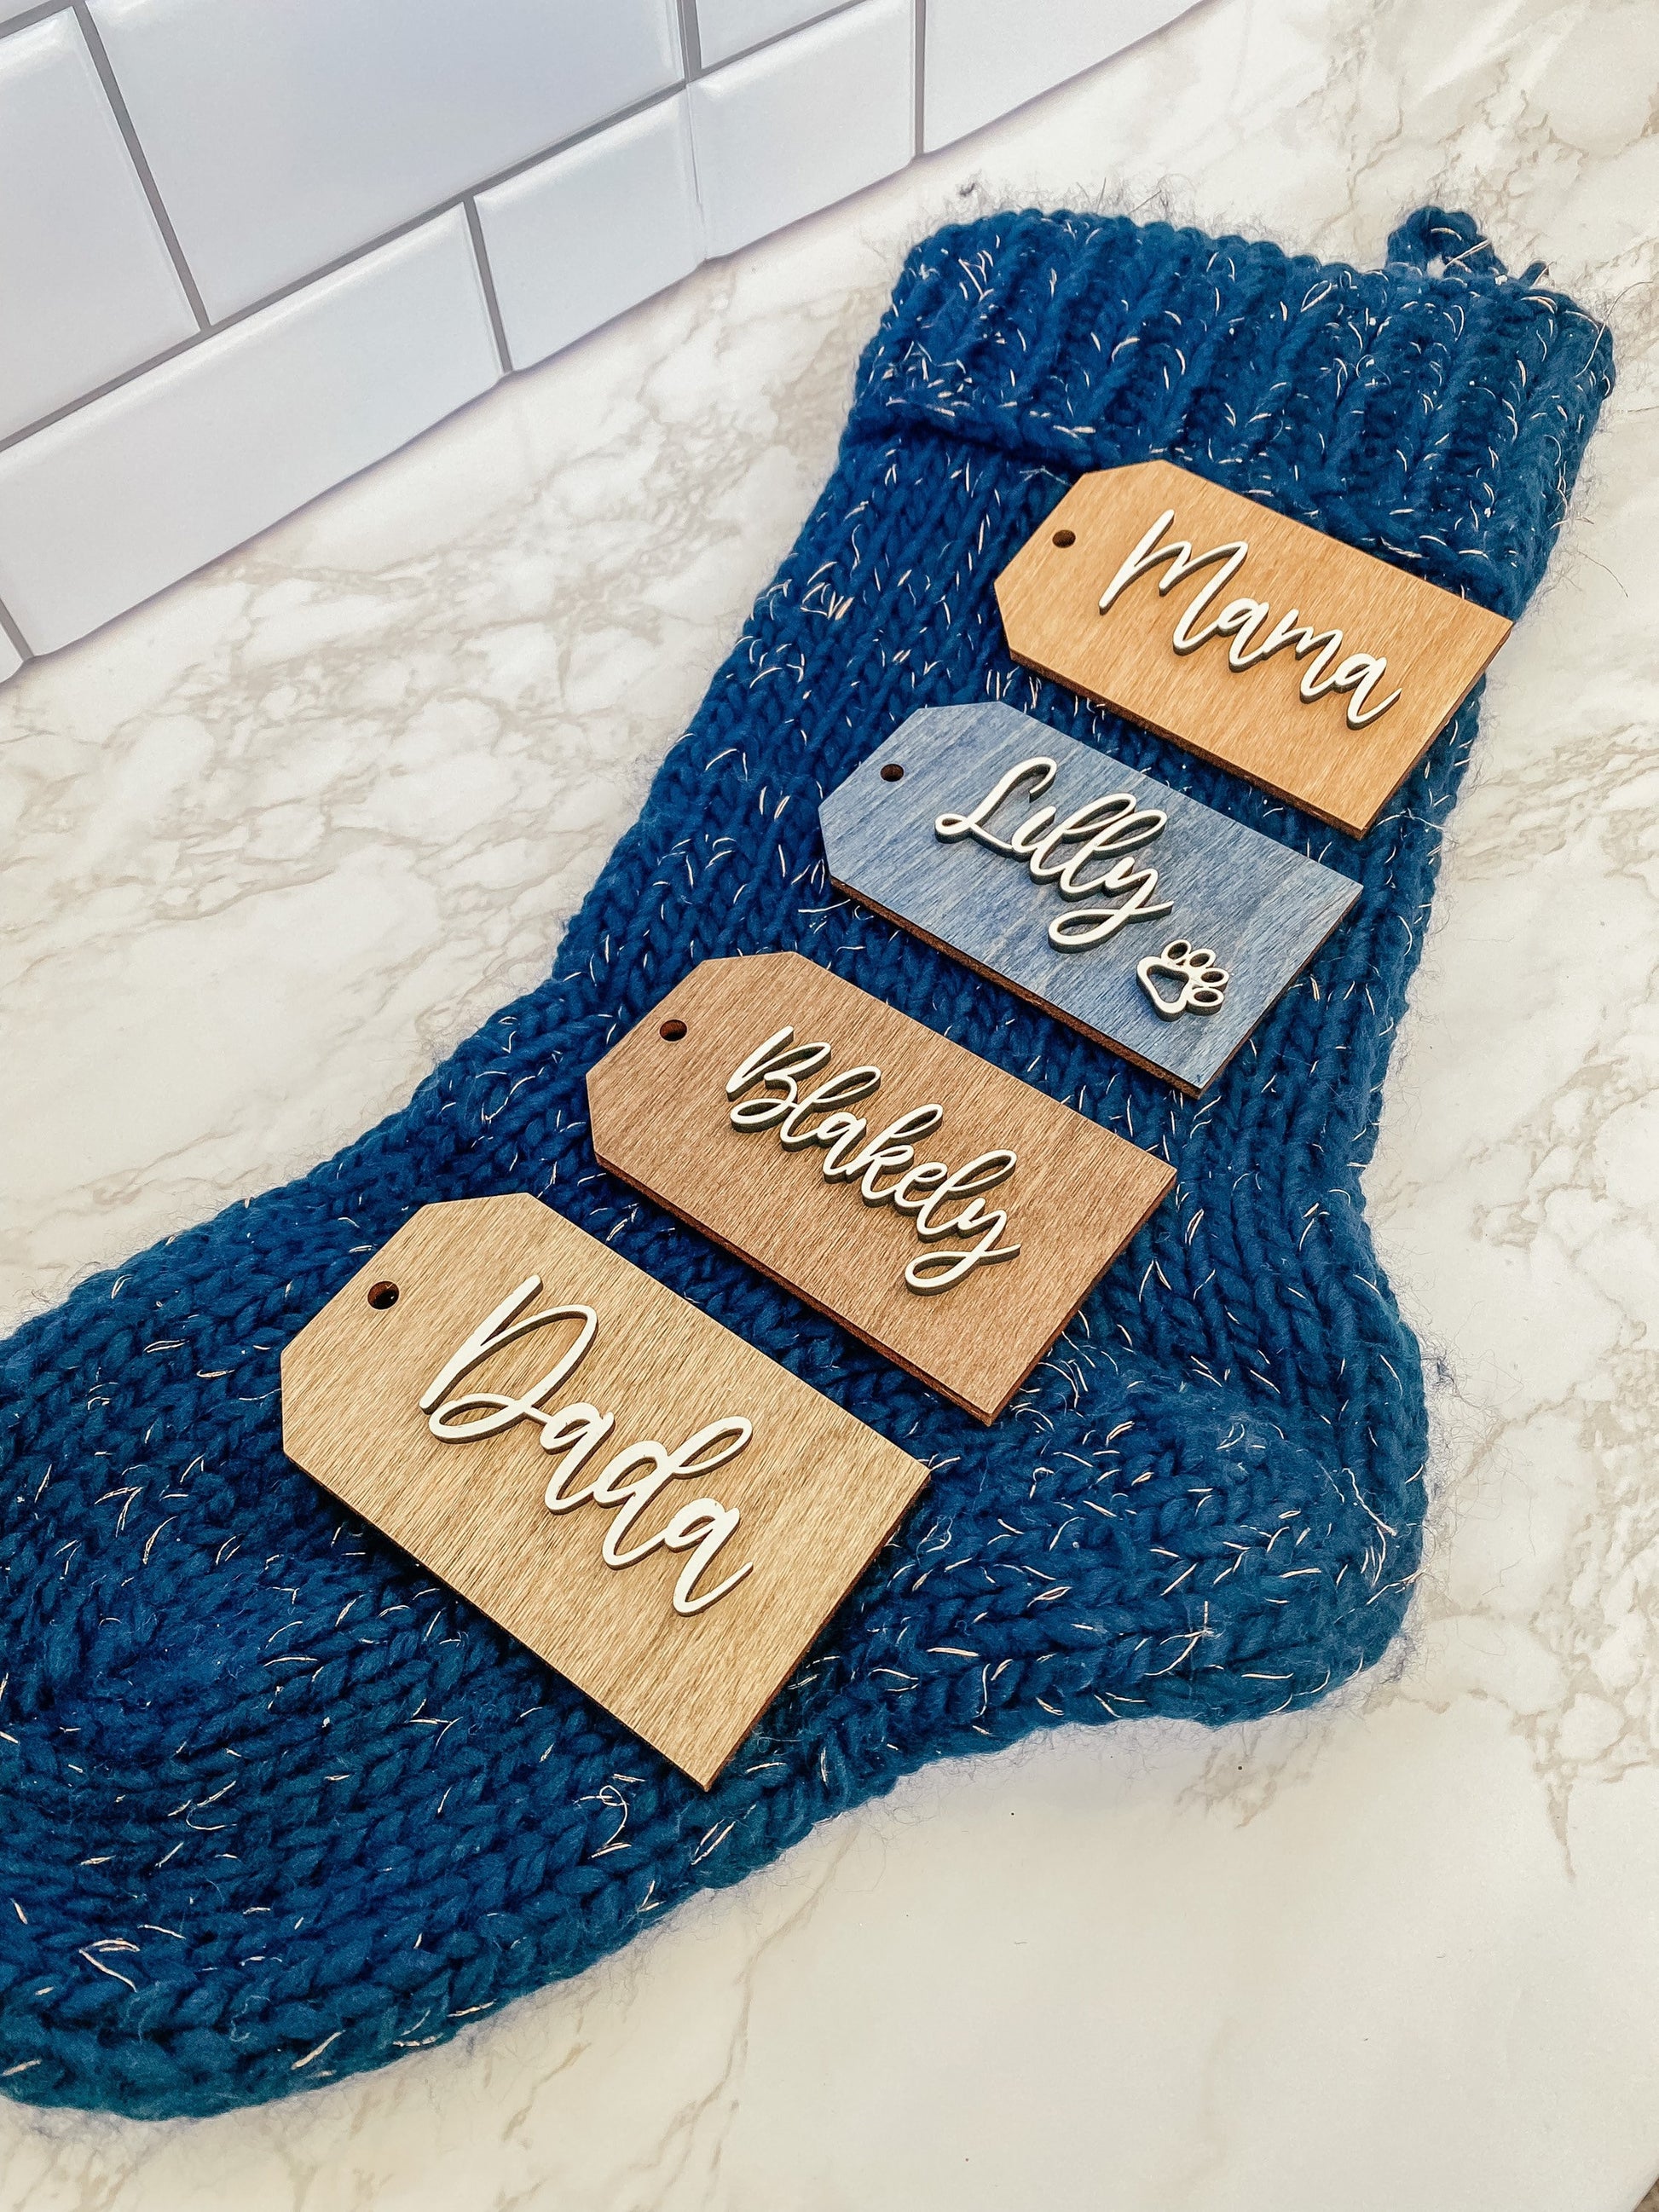 Personalized Christmas Stocking Tags, Stocking Name Tags, Wooden Name Tags, Personalized Wooden Tags, Laser Engraved Gift Tags, Laser Cut